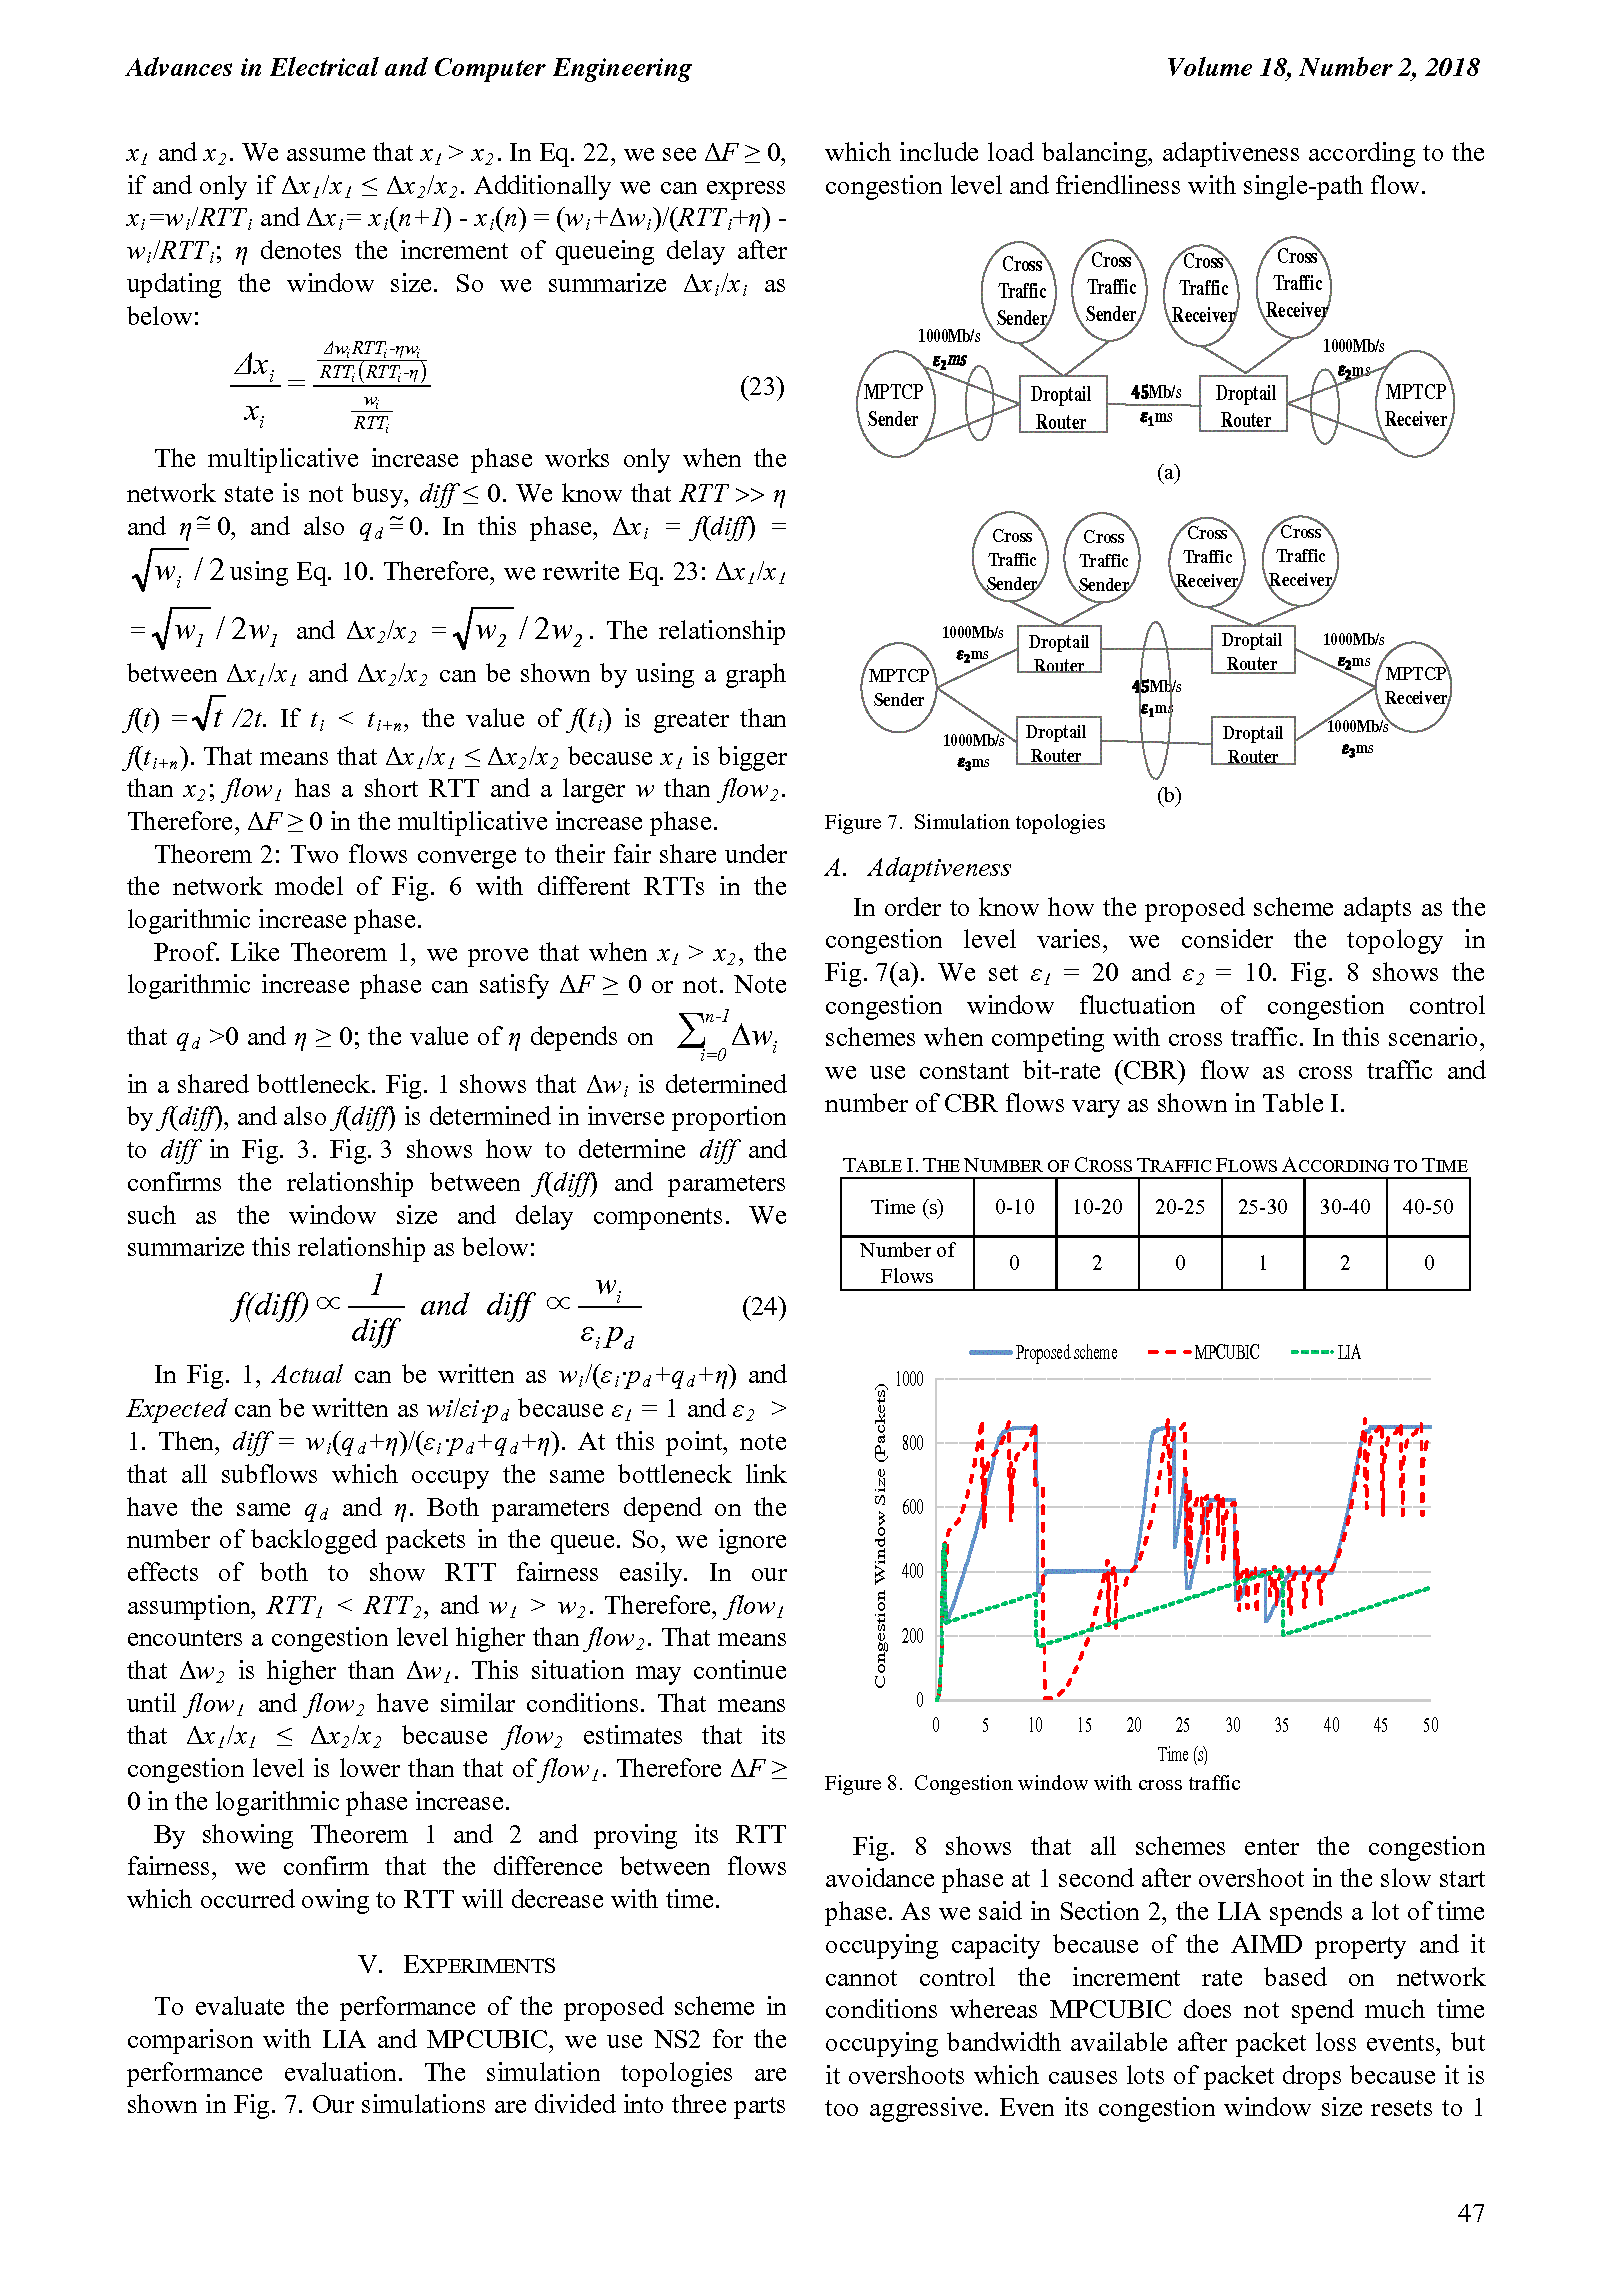 PDF Quickview for paper with DOI:10.4316/AECE.2018.02006